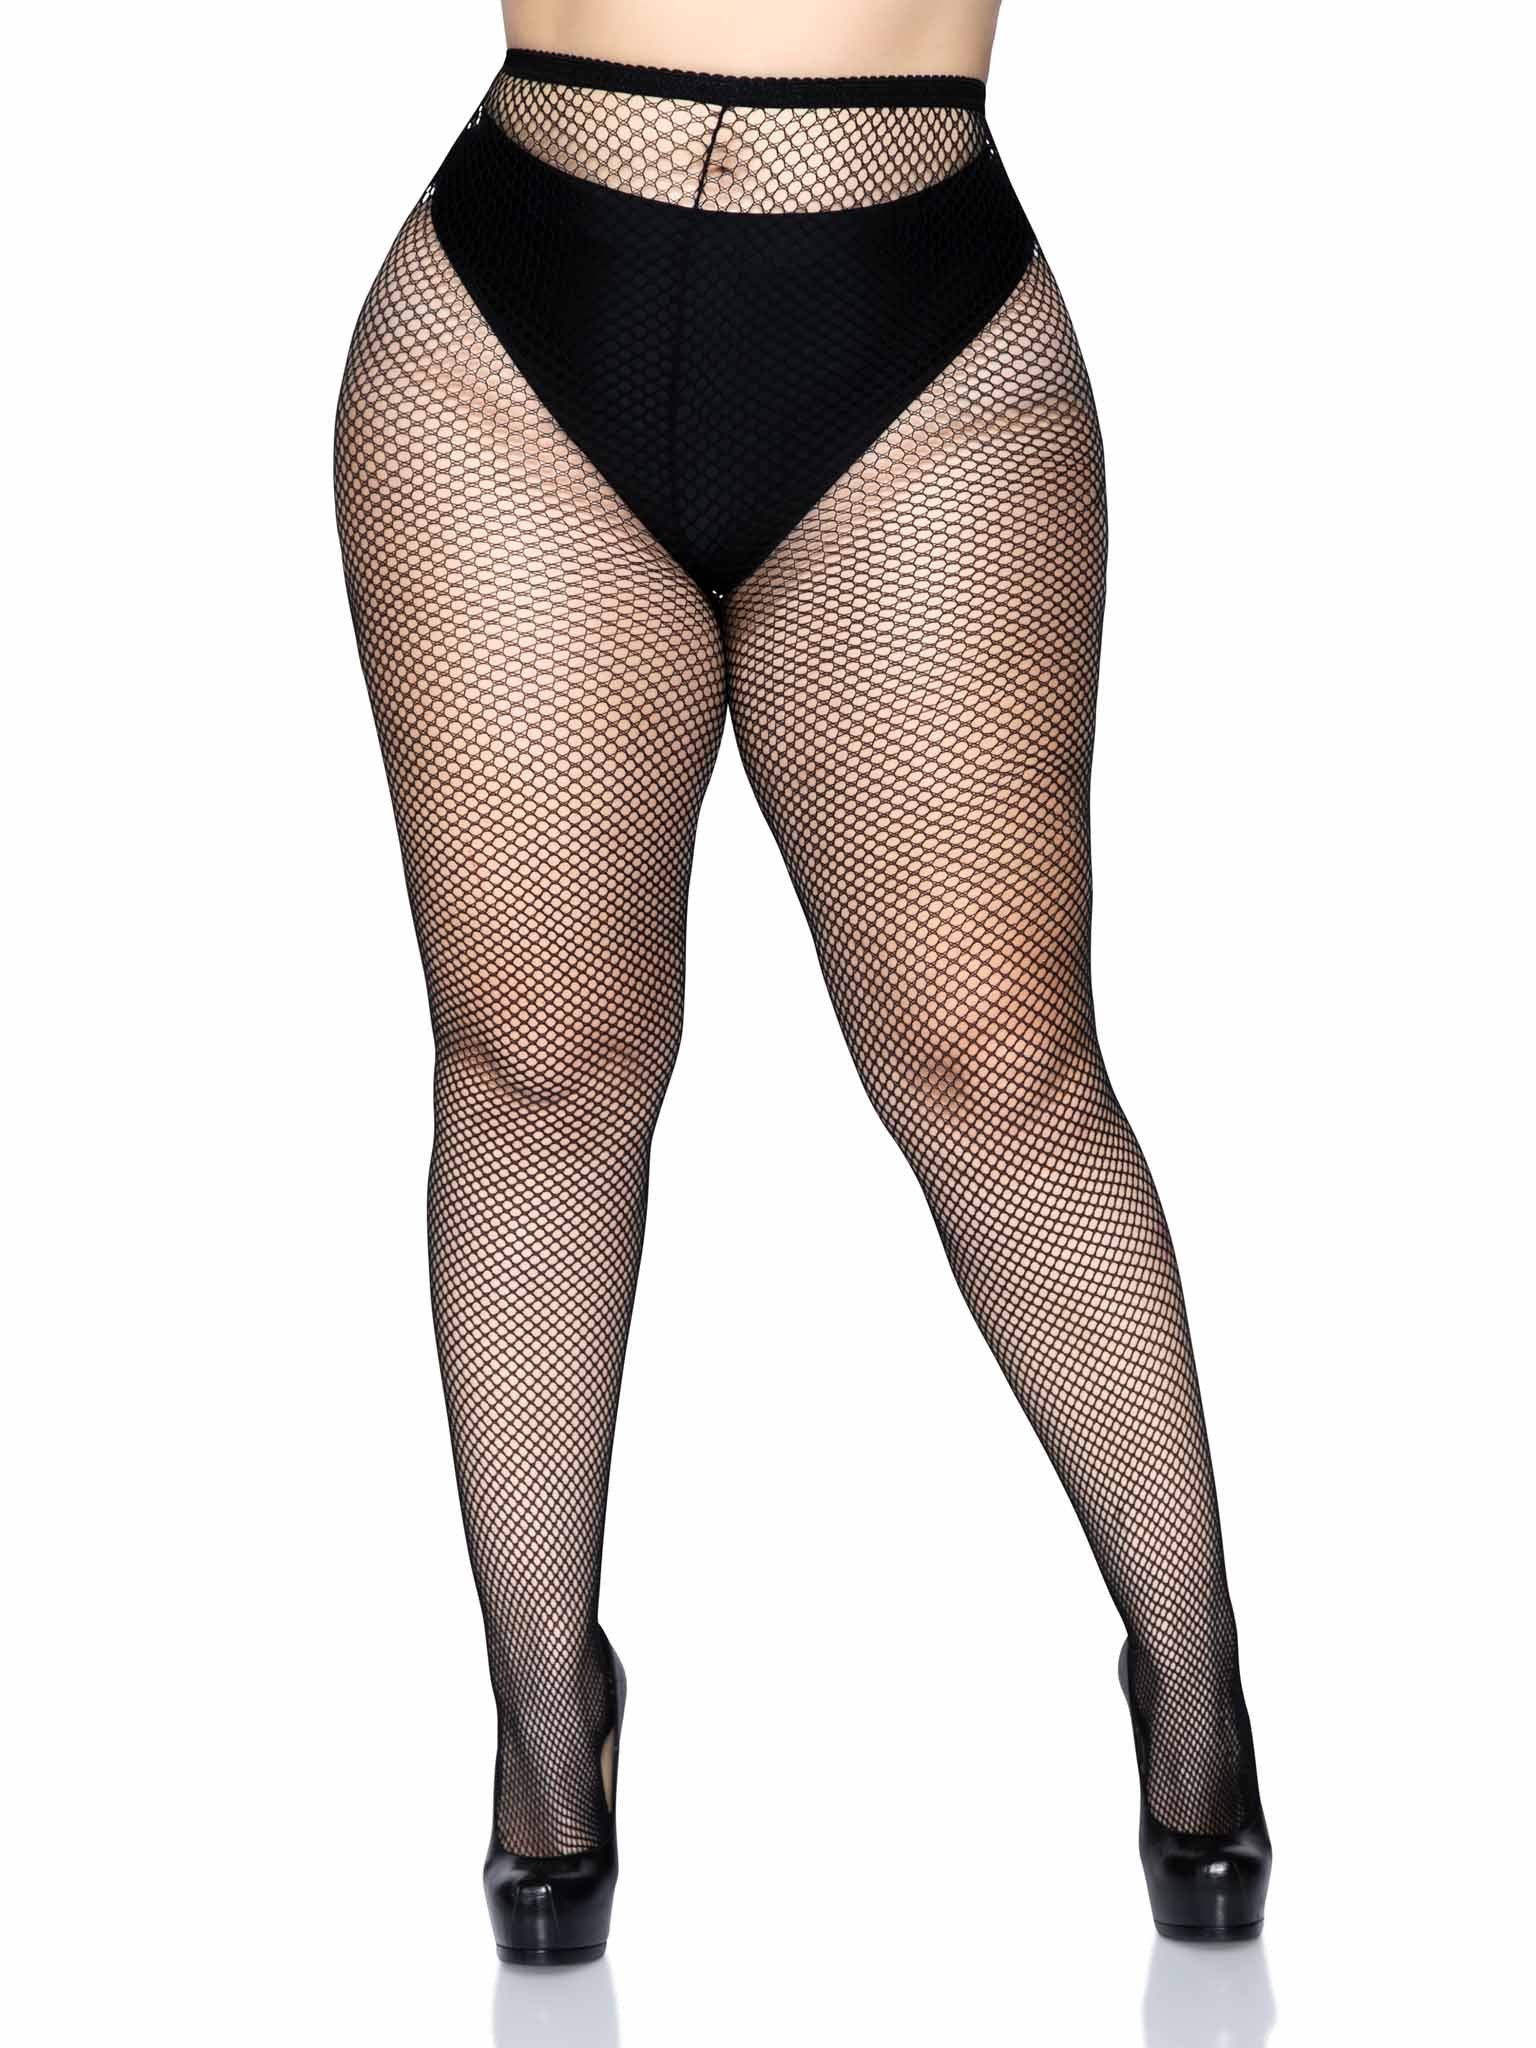 36 Pieces Womens Fishnet Pantyhose Solid Black - Queen Size - Womens  Panties & Underwear